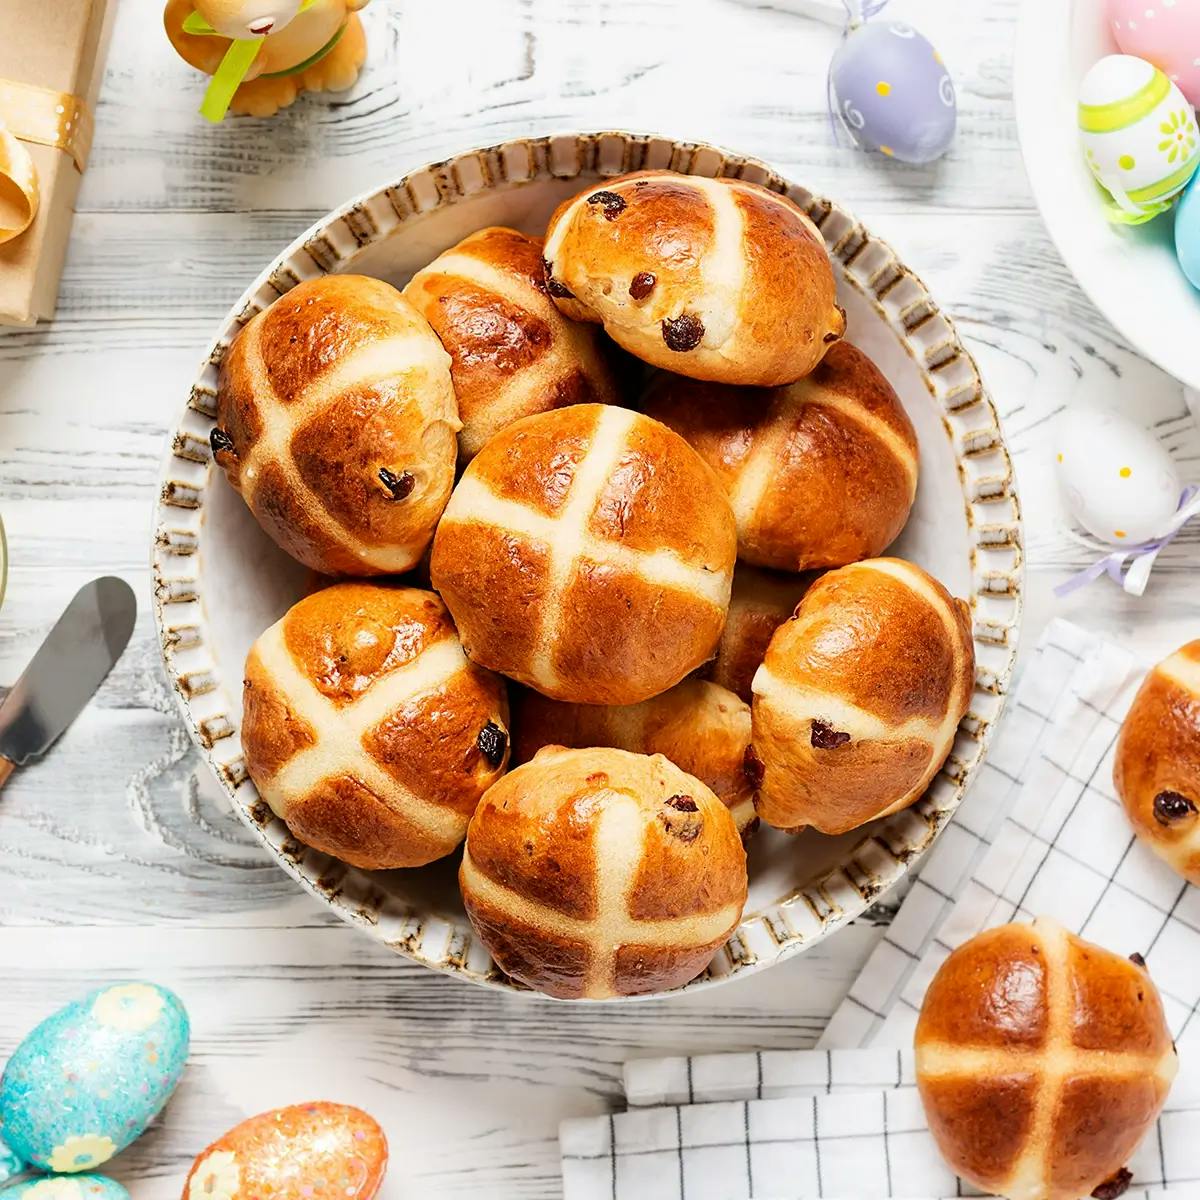 A plate of hot cross buns on the table for Easter brunch.